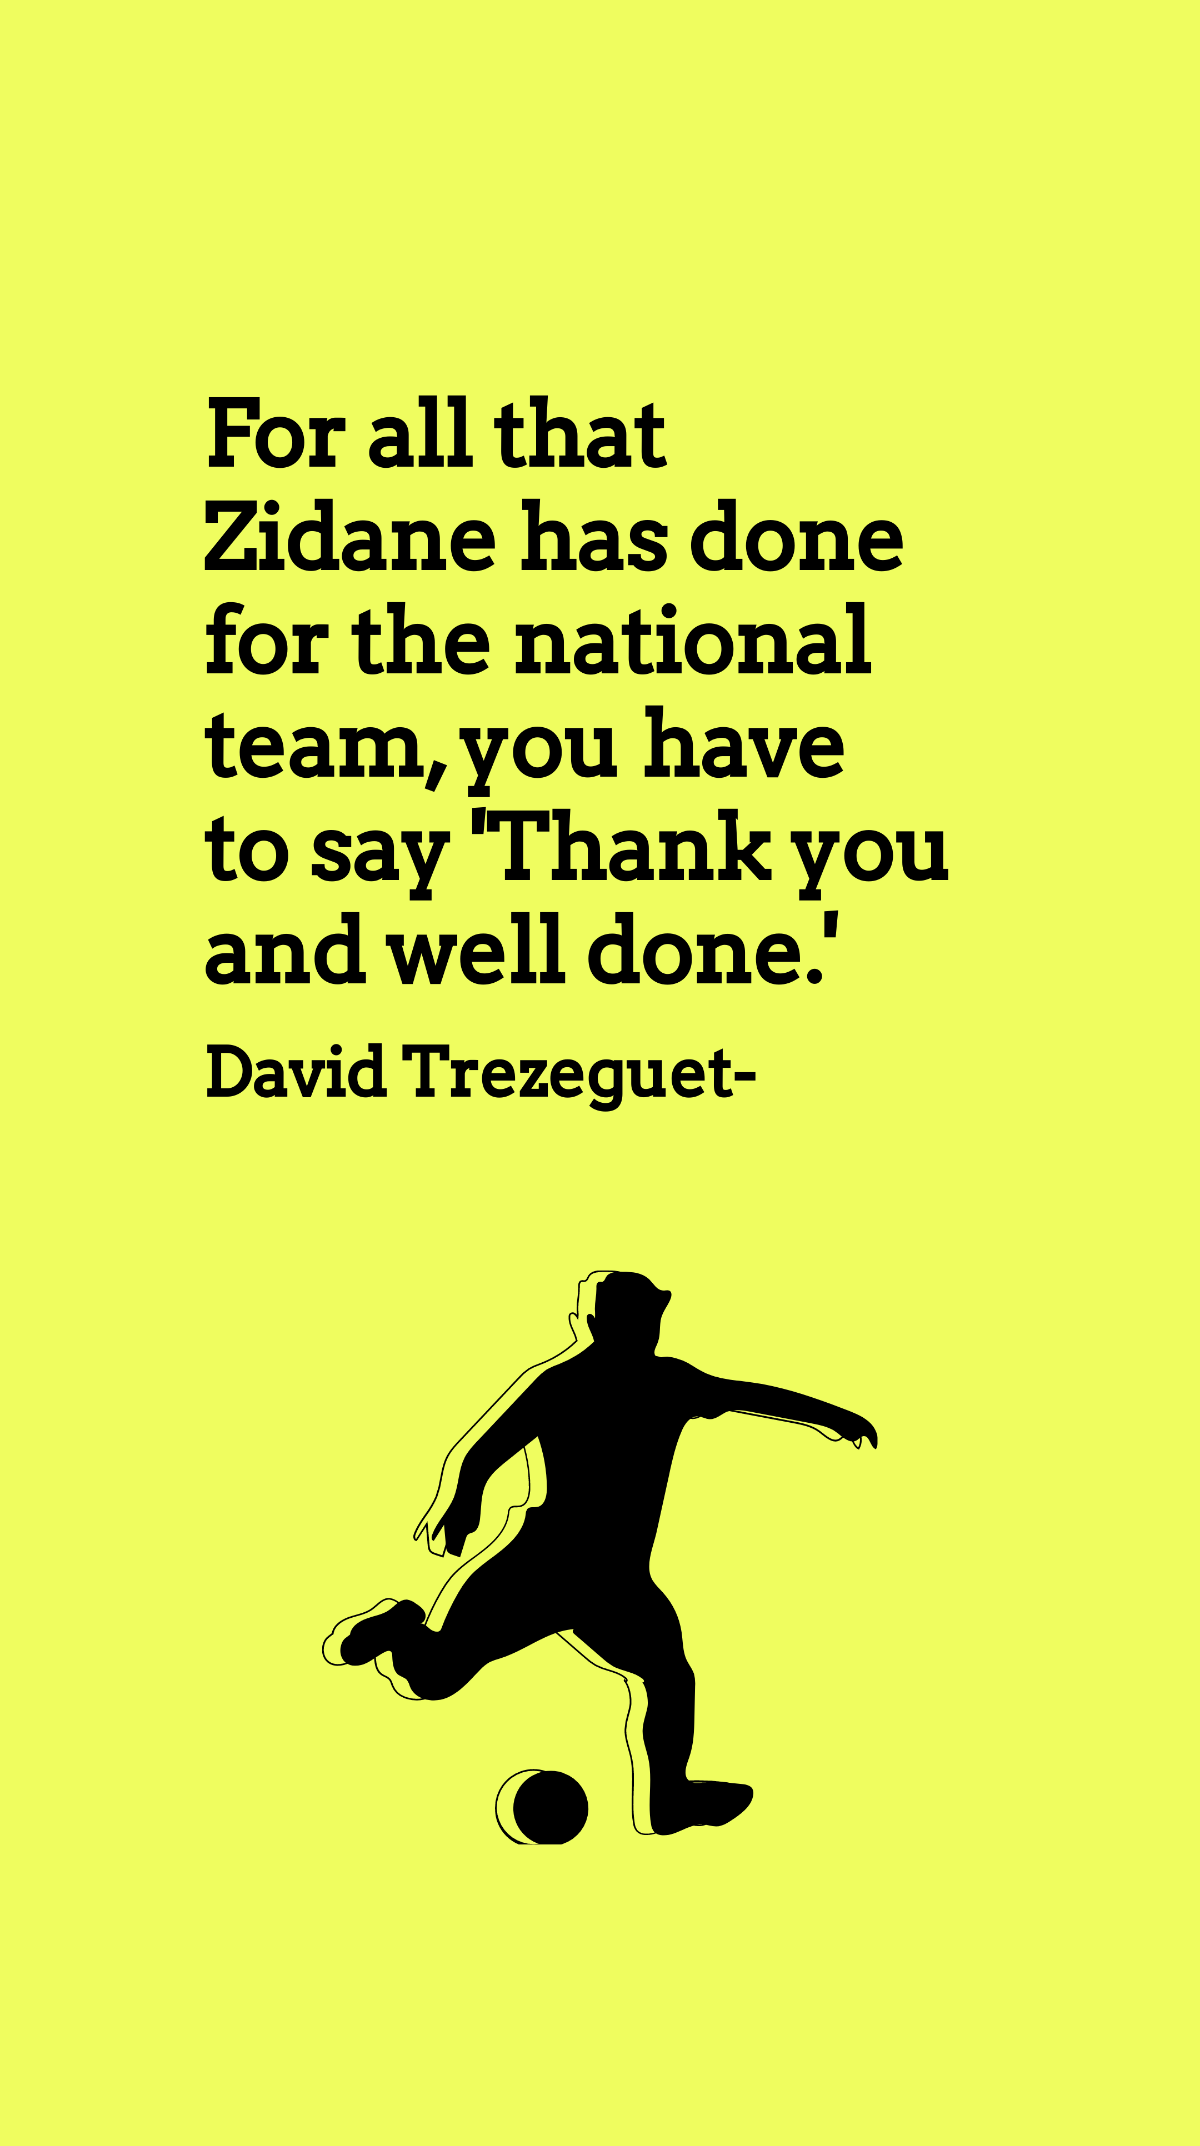 Free David Trezeguet - For all that Zidane has done for the national team, you have to say 'Thank you and well done.'  Template